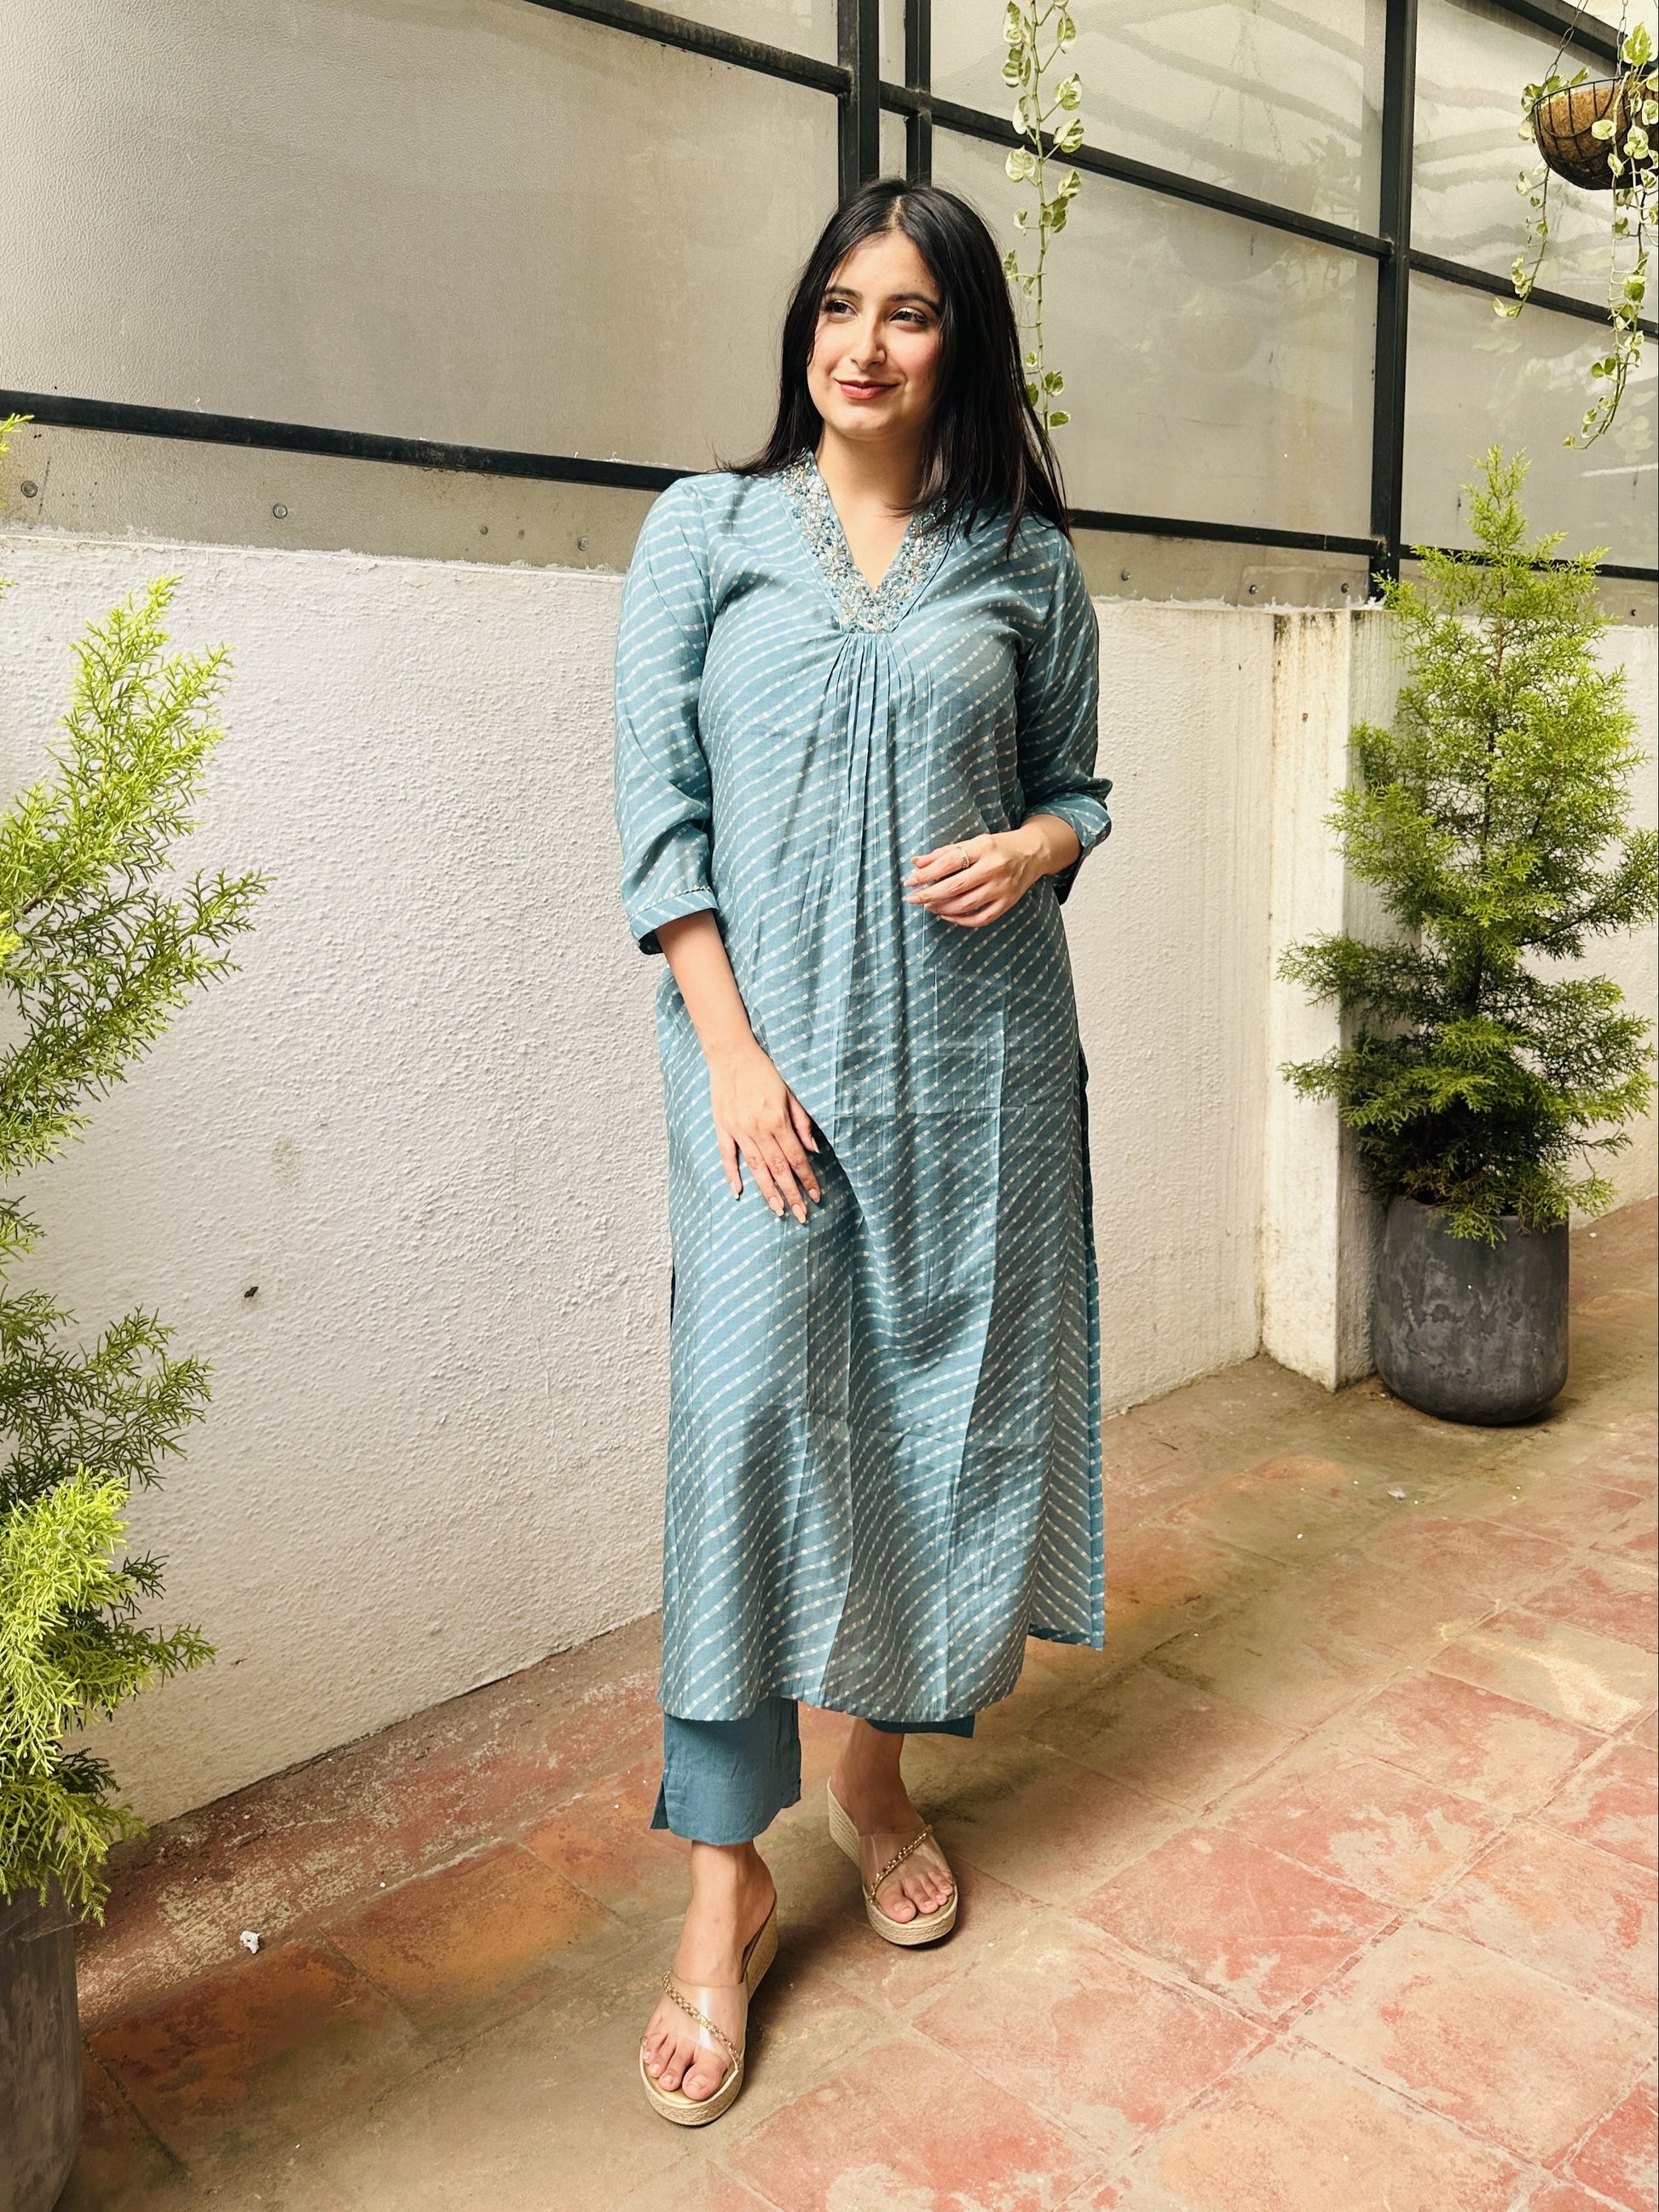 Kurtis + Jeans Outfits You Just Can't Miss! | Kurti designs, Stylish  dresses, Fashion design clothes